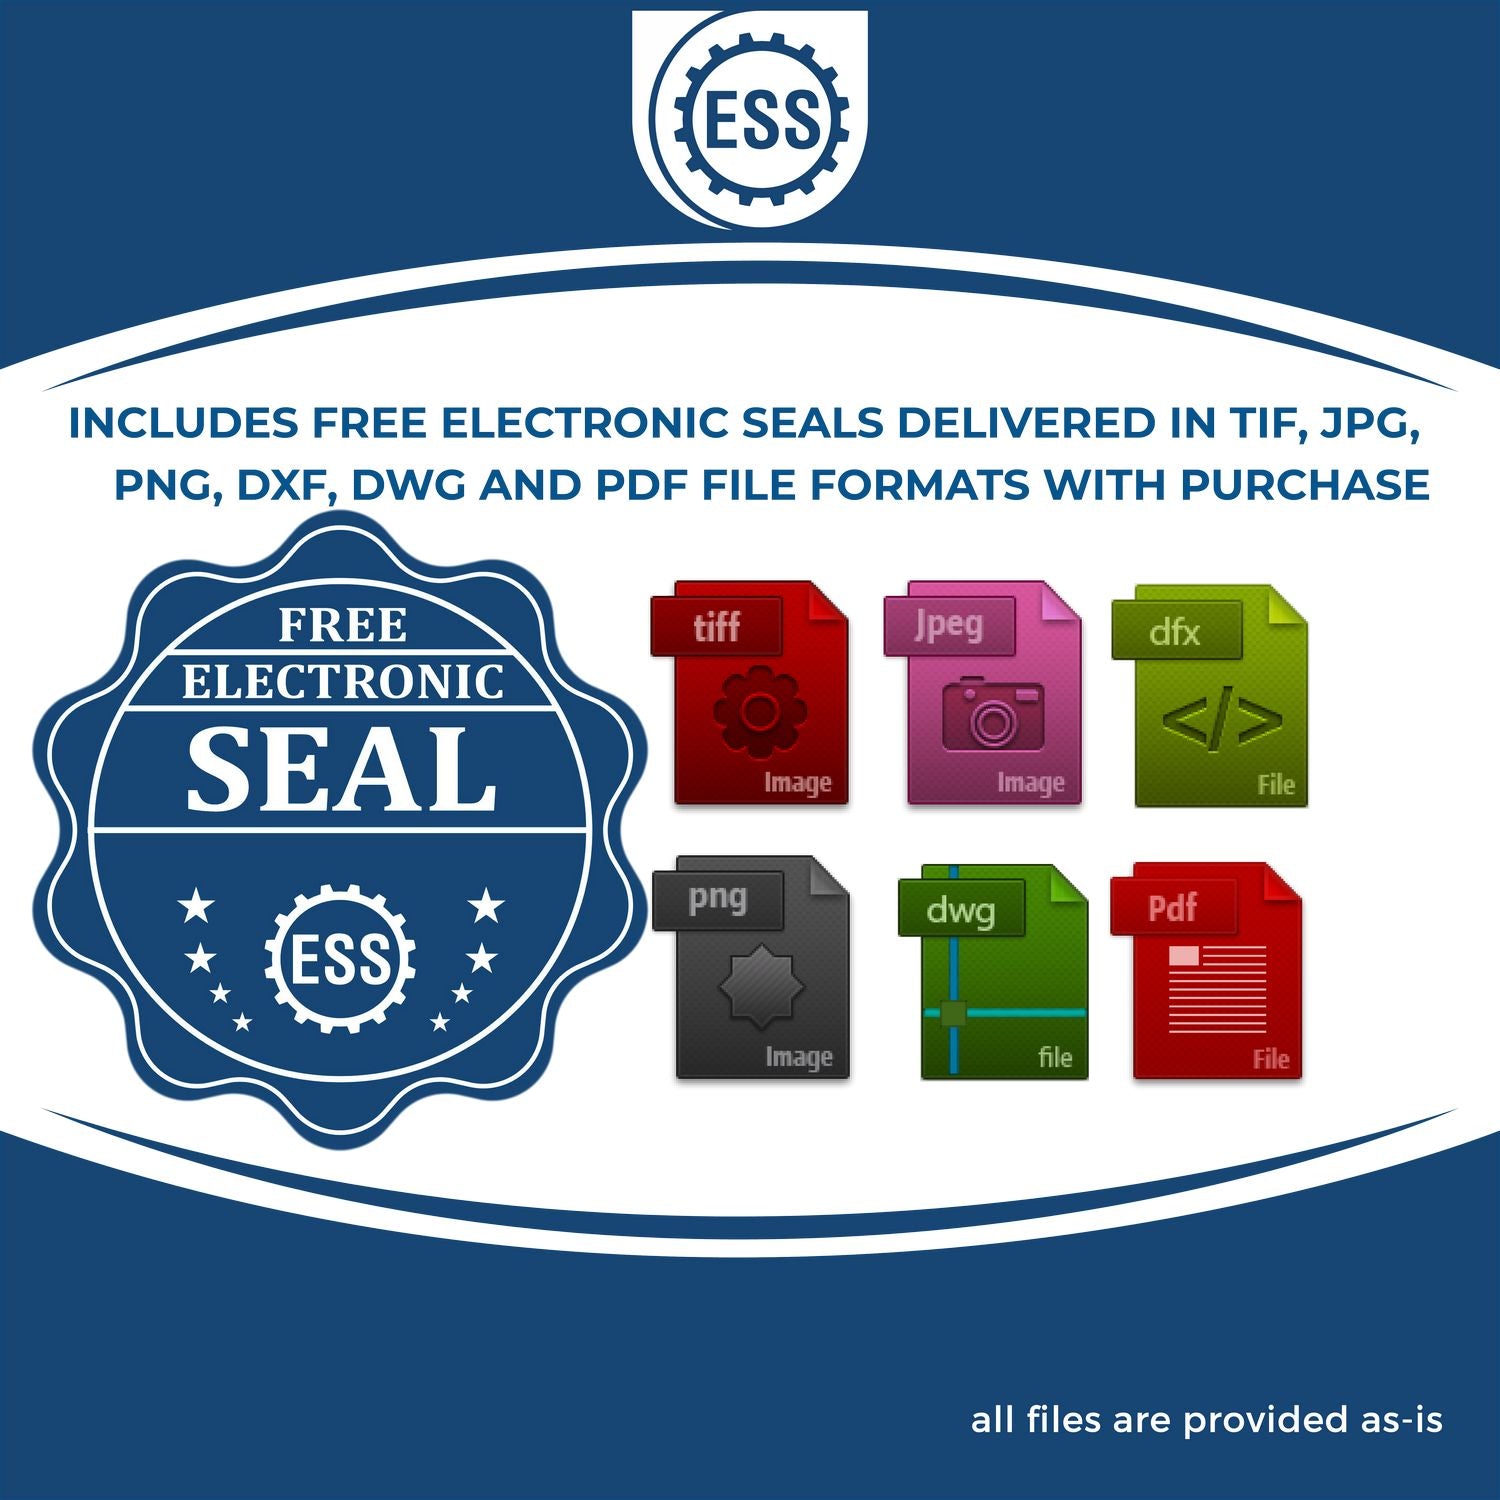 An infographic for the free electronic seal for the Mississippi Professional Engineer Seal Stamp illustrating the different file type icons such as DXF, DWG, TIF, JPG and PNG.